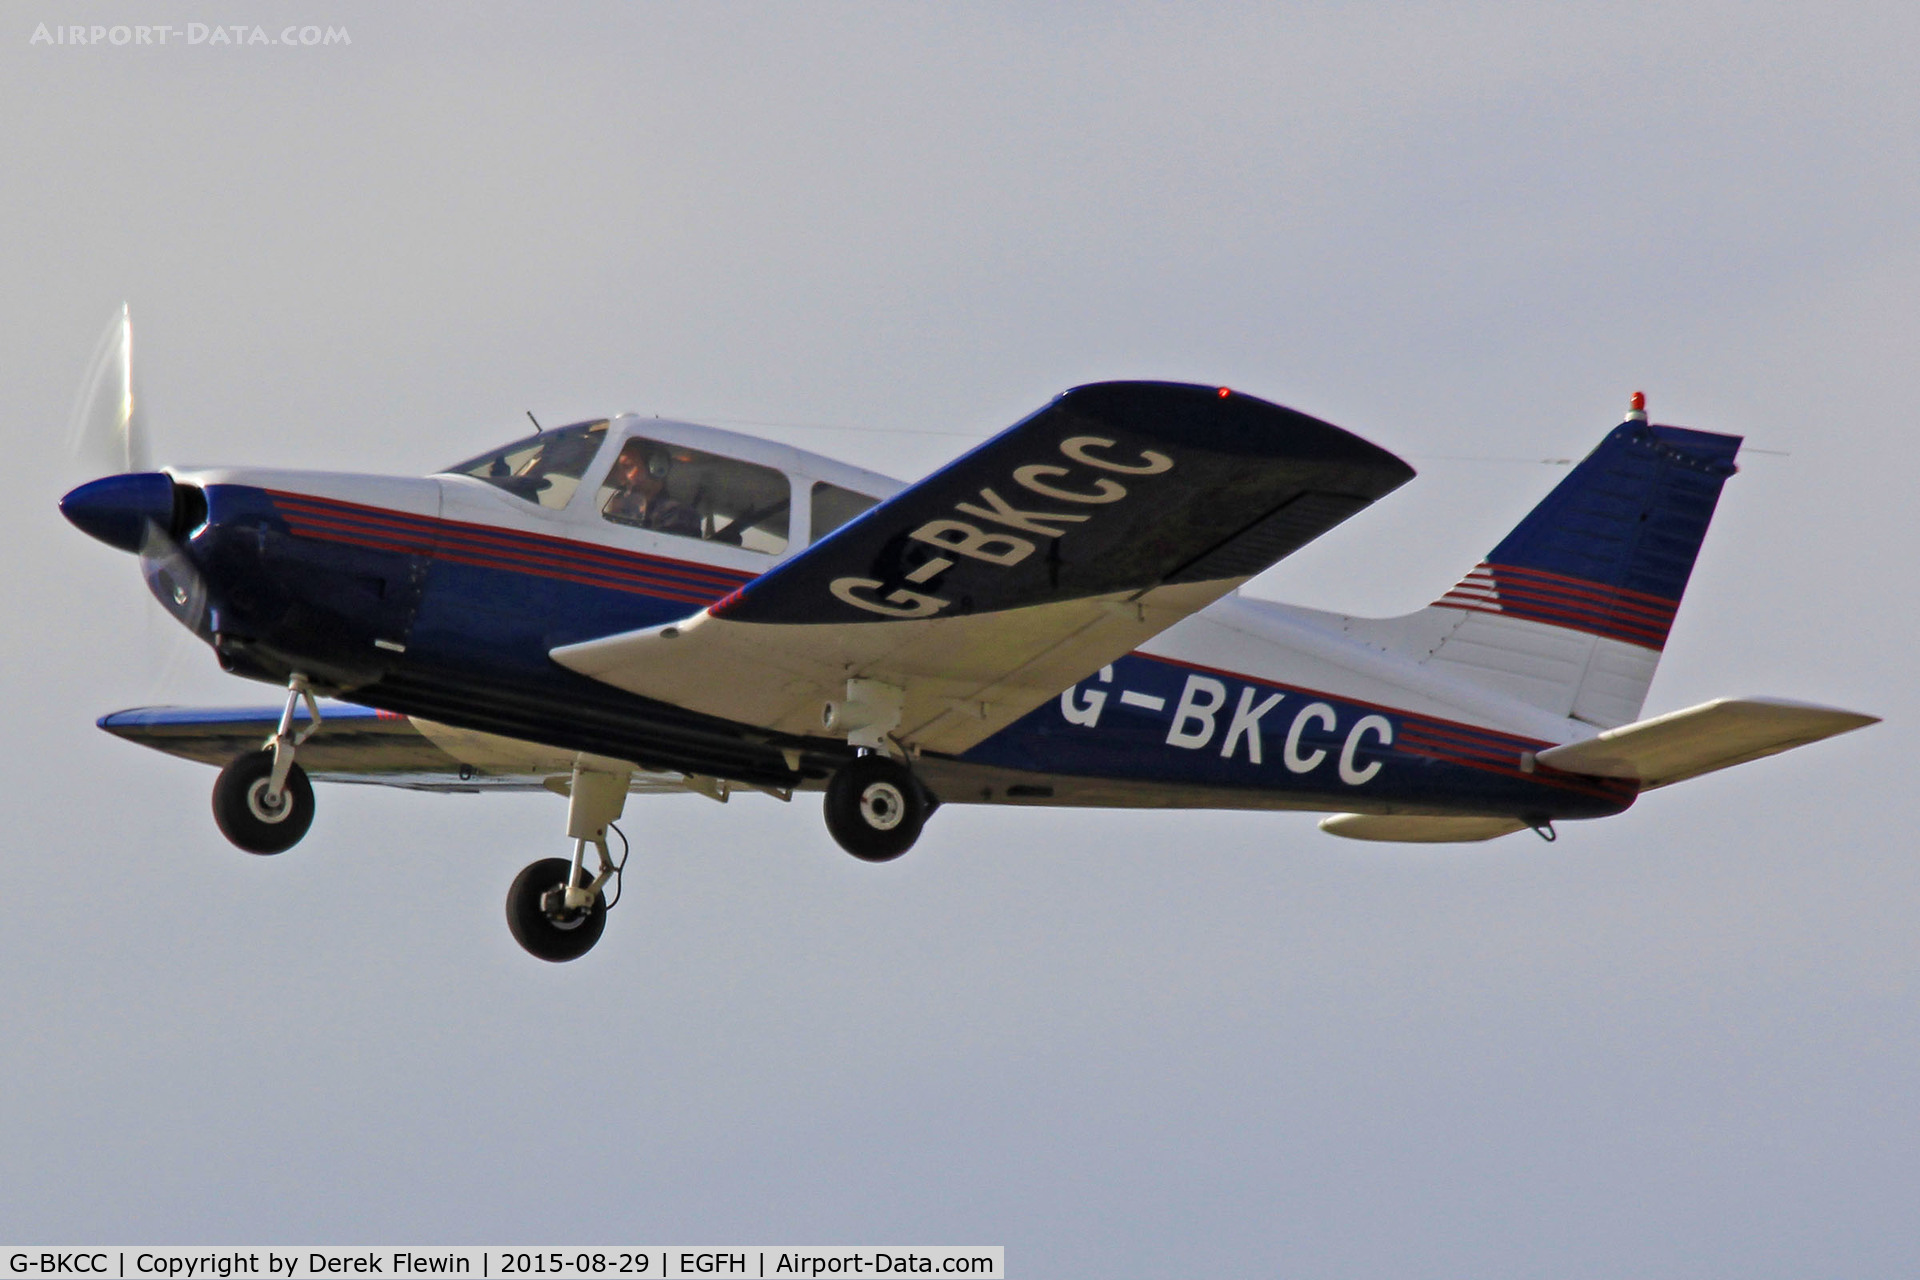 G-BKCC, 1974 Piper PA-28-180 Cherokee Archer C/N 28-7405099, Cherokee, Gloucestershire (Staverton) Airport based, previously OY-BGY, seen departing runway 22, en-route RTB.